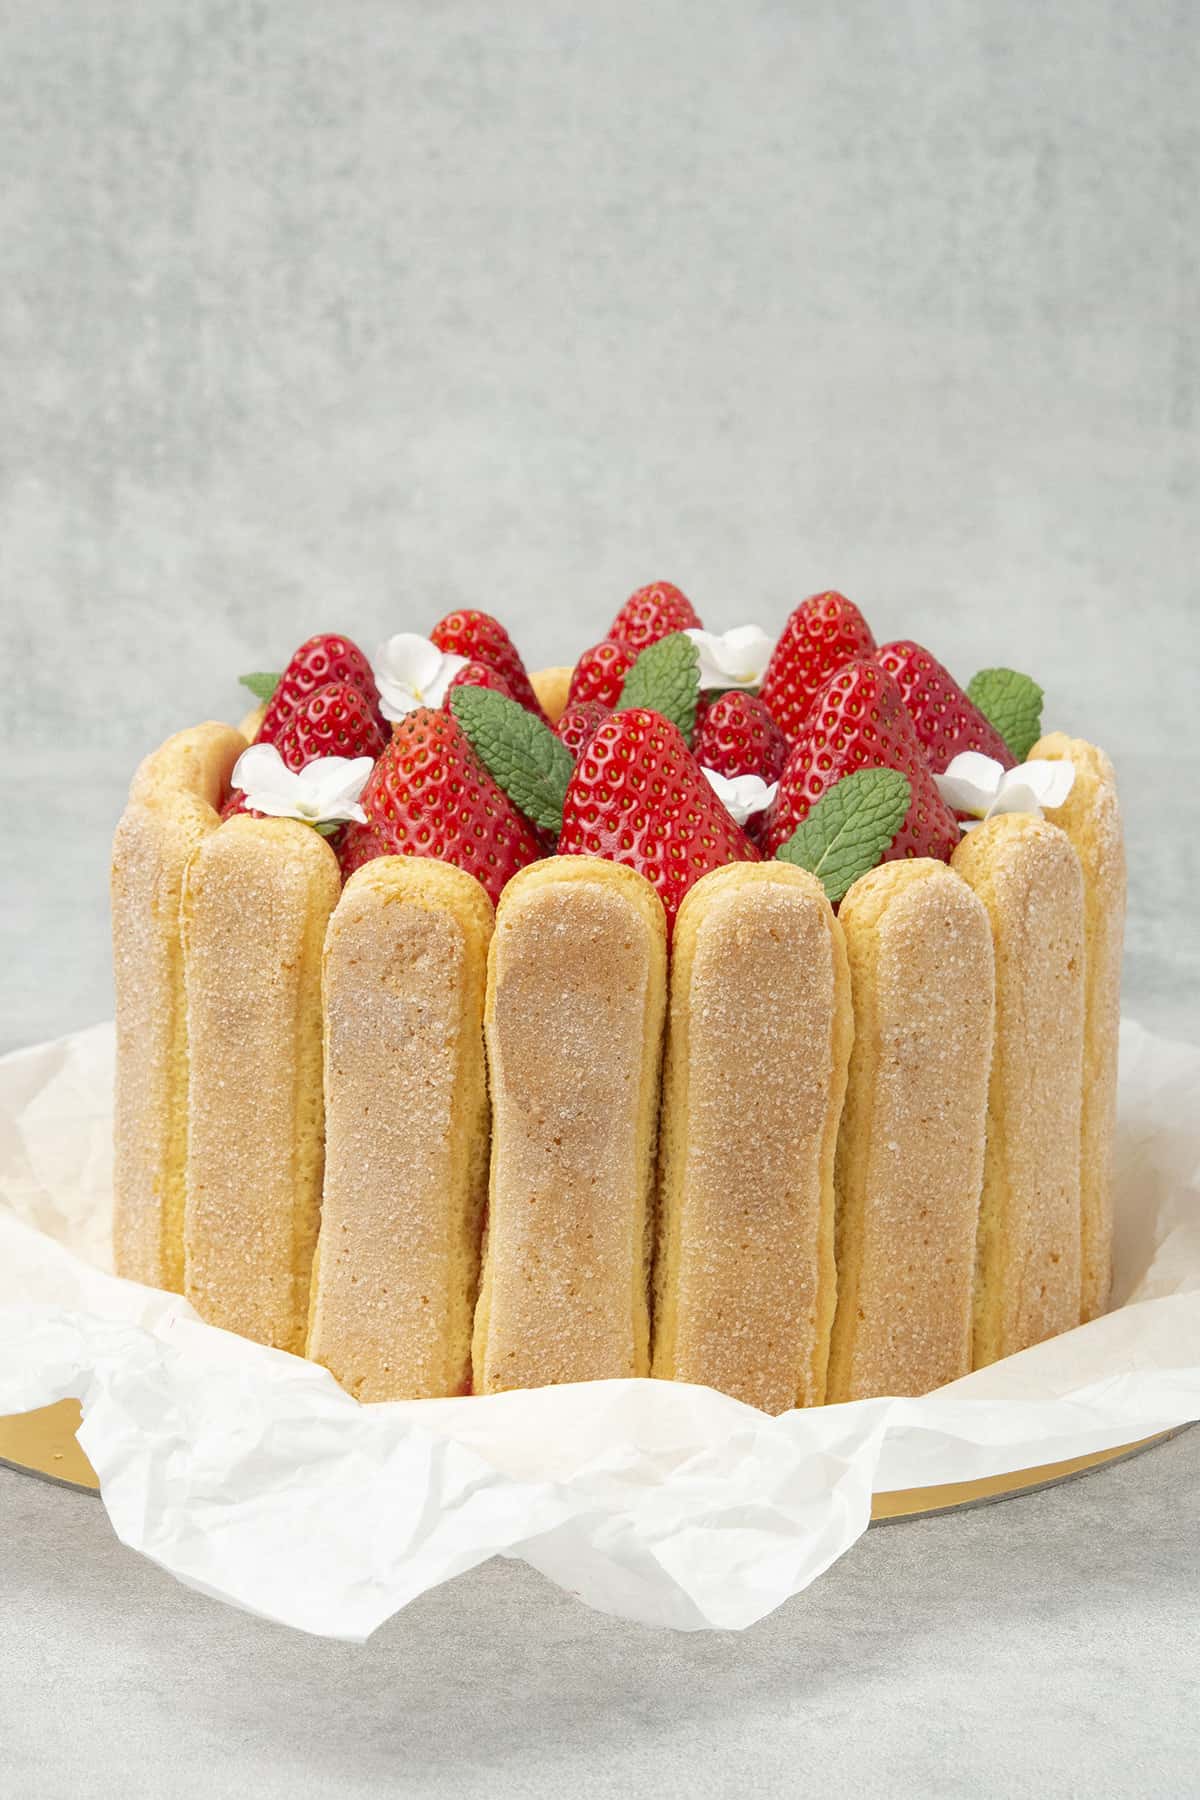 Strawberry charlotte cake on a paper tray